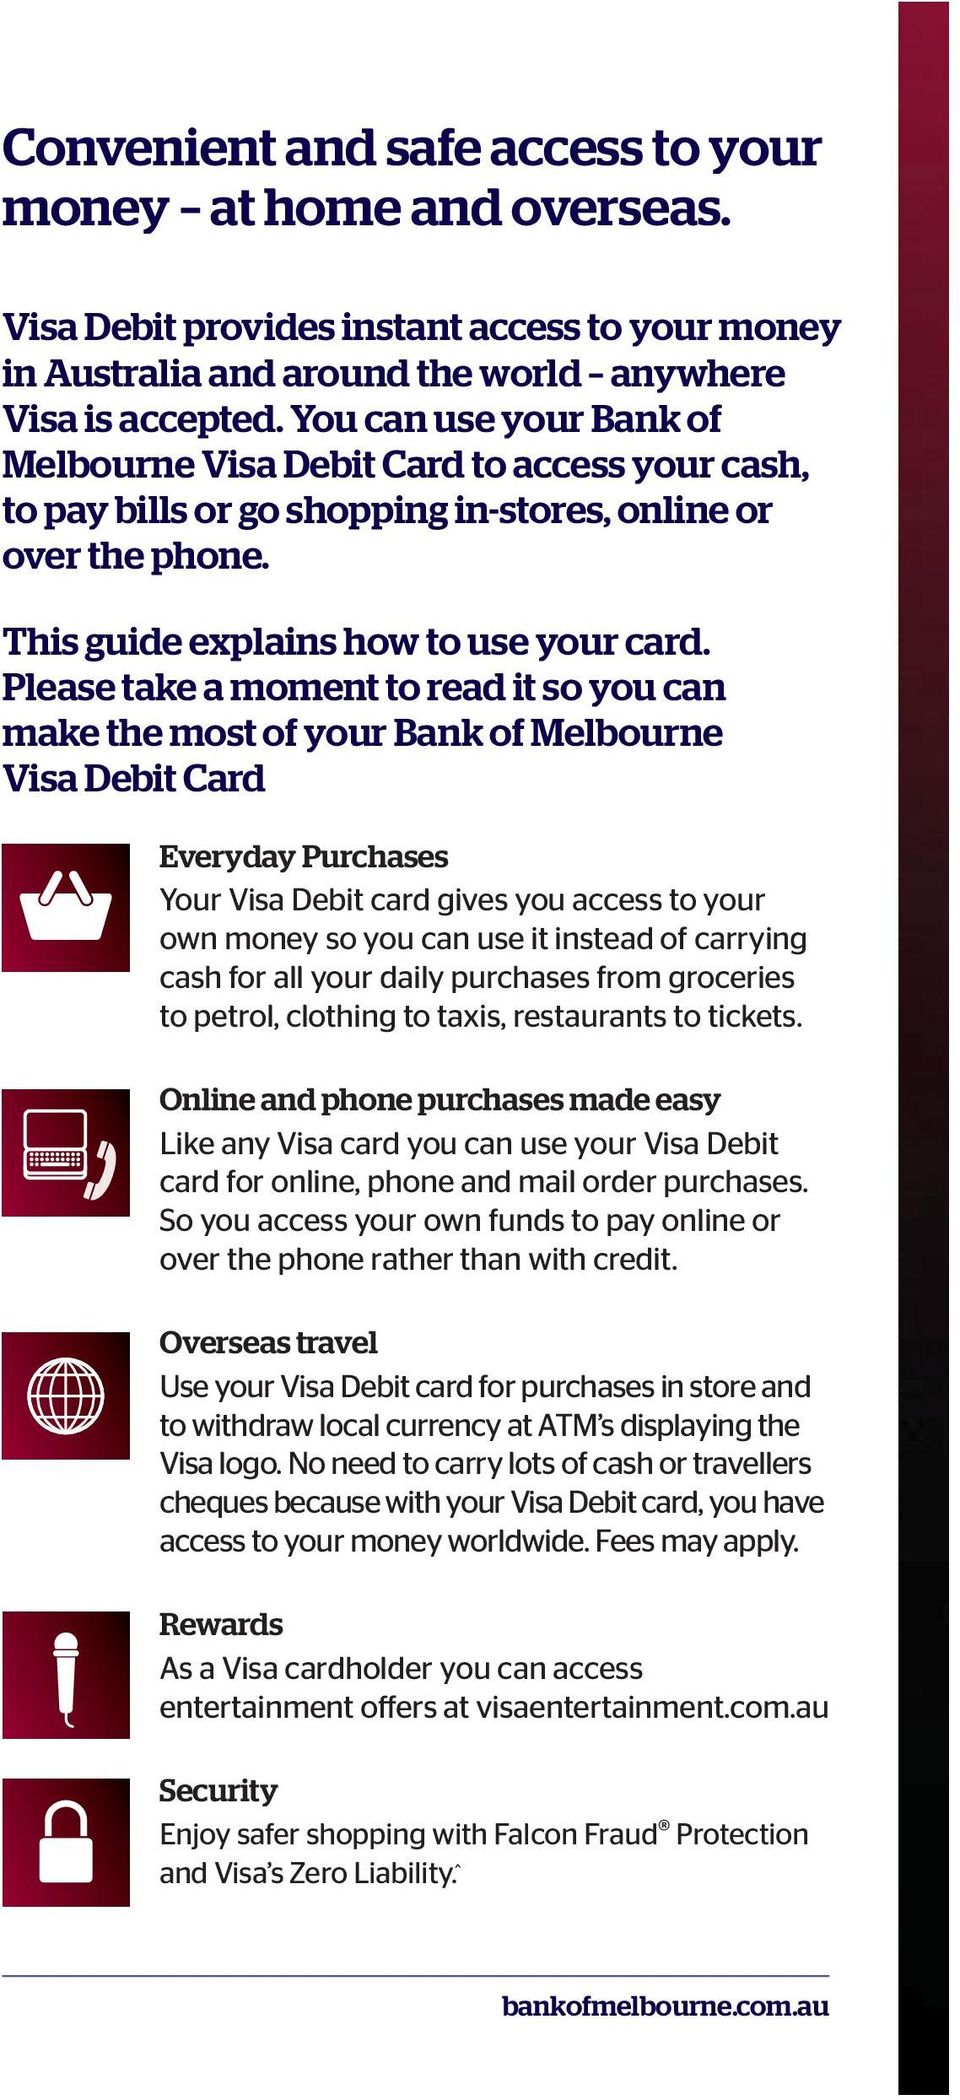 Please take a moment to read it so you can make the most of your Bank of Melbourne Visa Debit Card Everyday Purchases Your Visa Debit card gives you access to your own money so you can use it instead